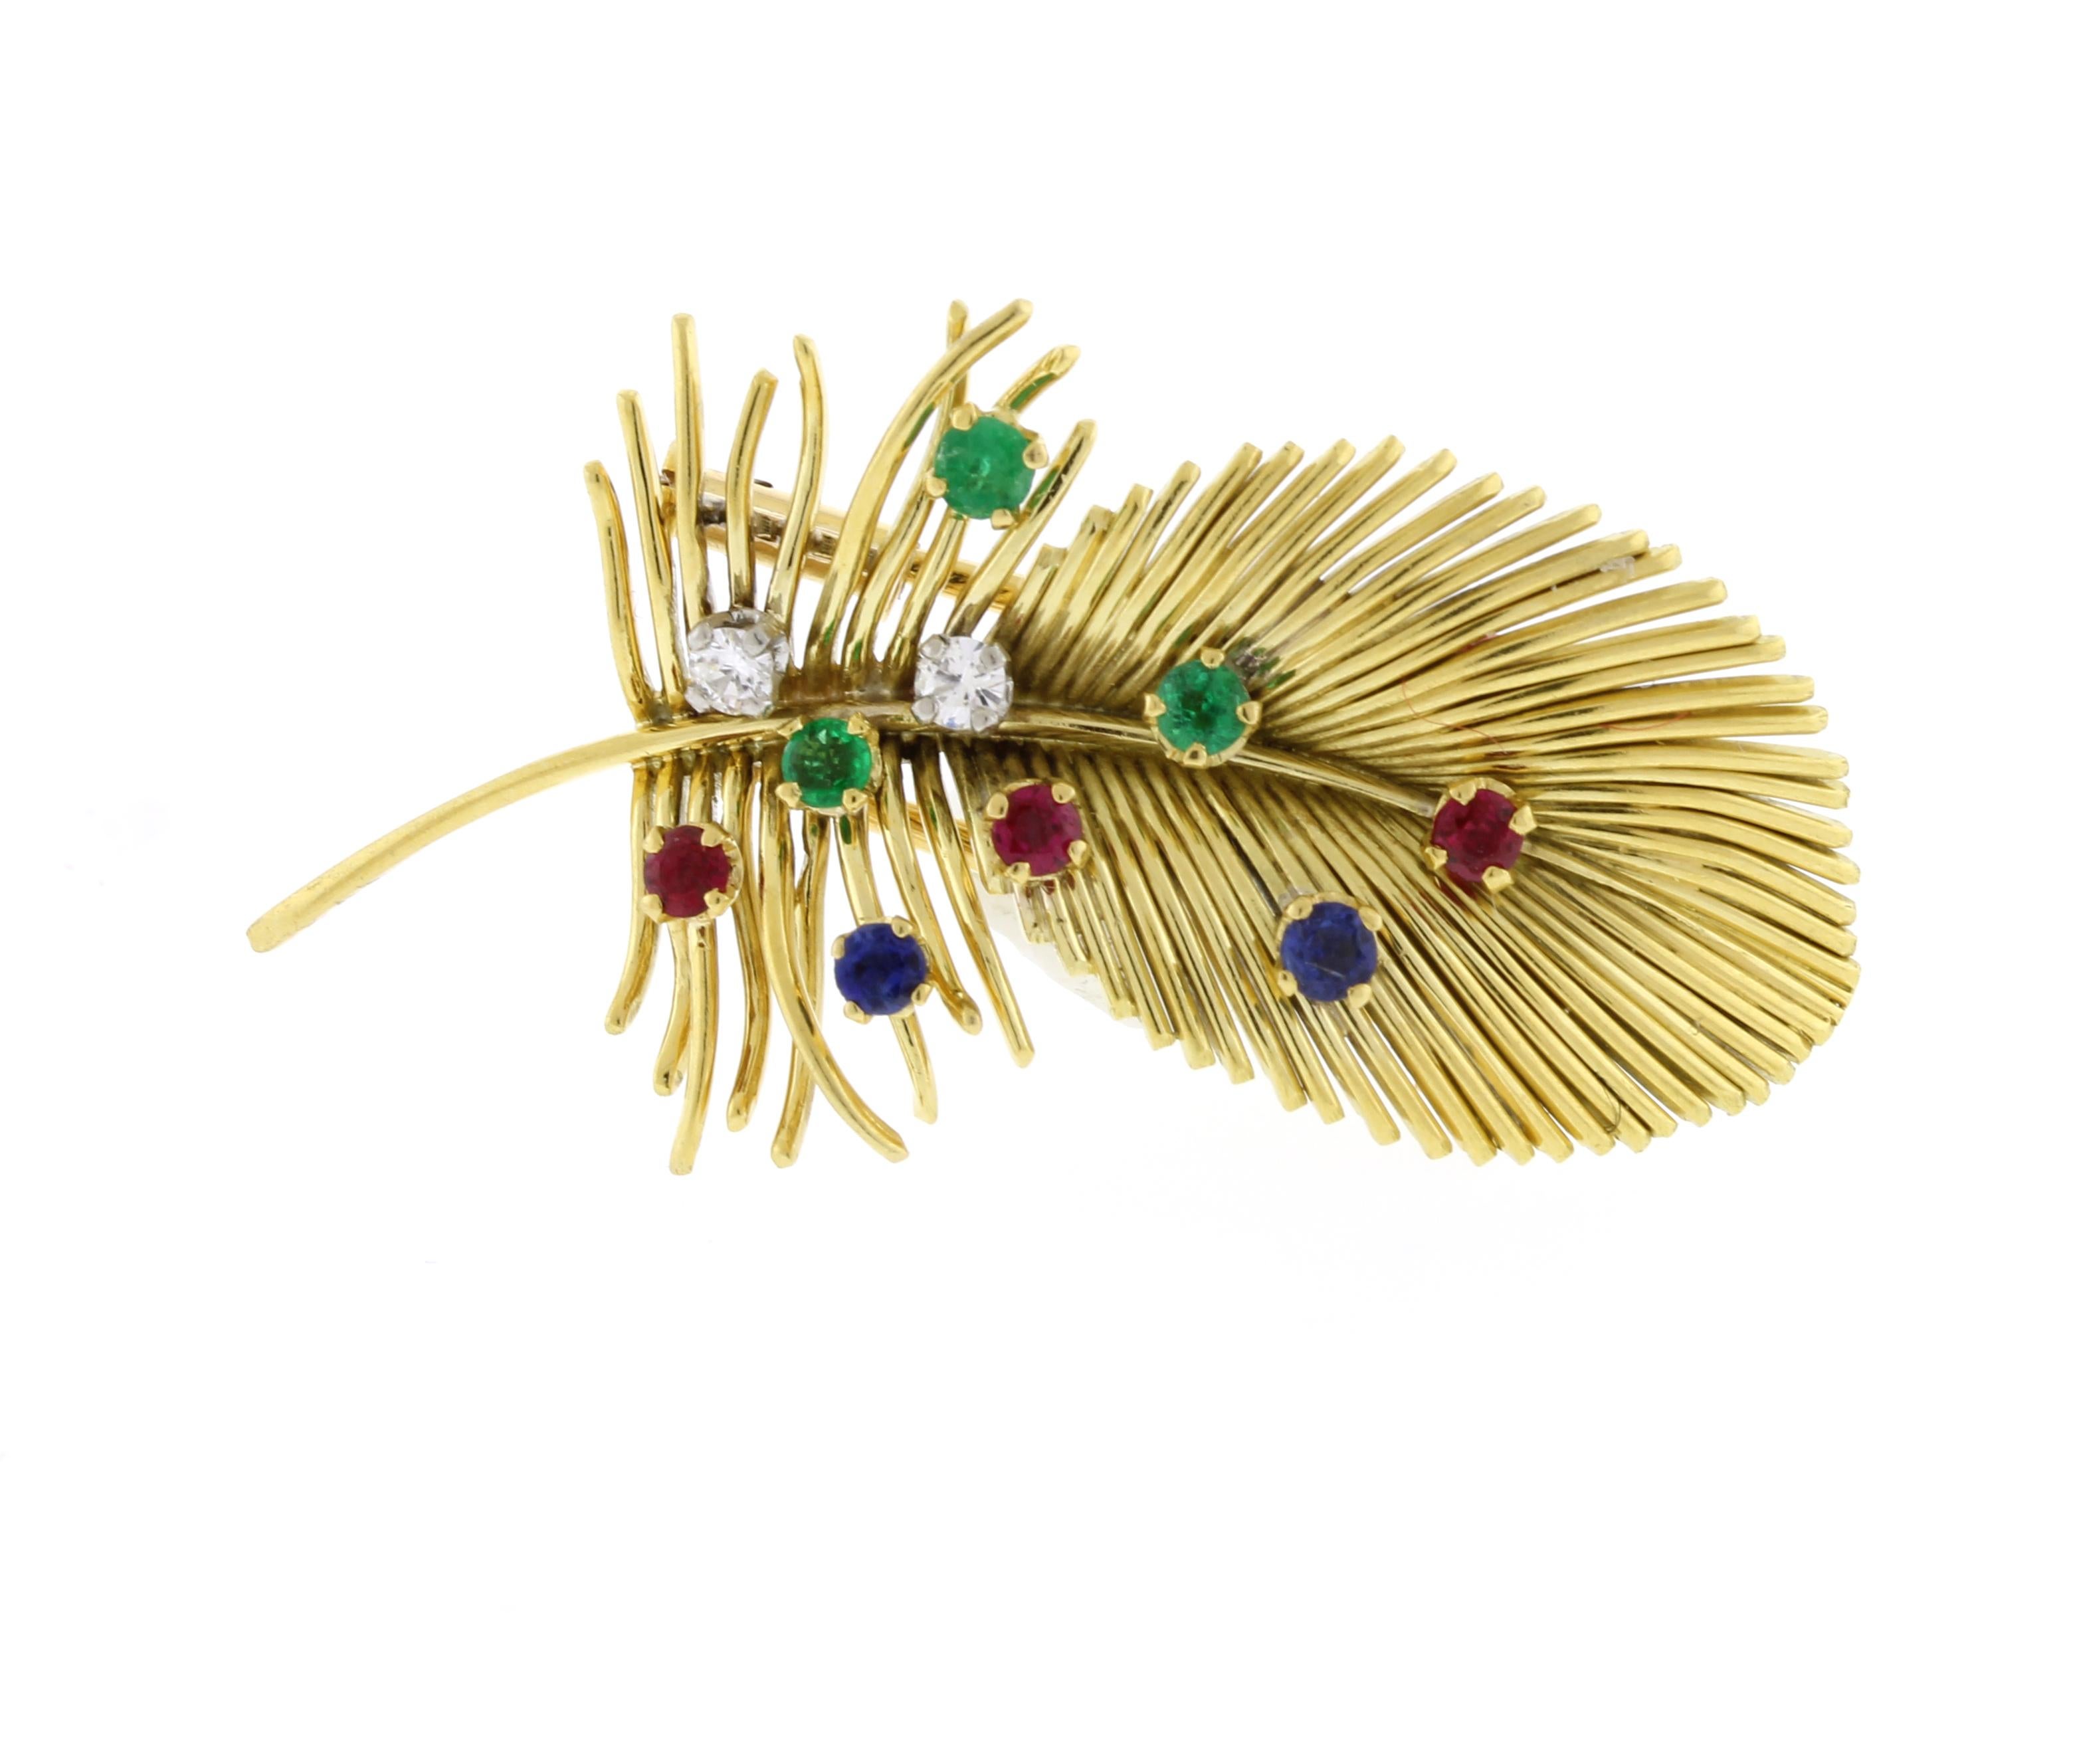 Brilliant Cut Boucheron Feather Brooch with Emeralds, Rubies, Sapphires and Diamonds